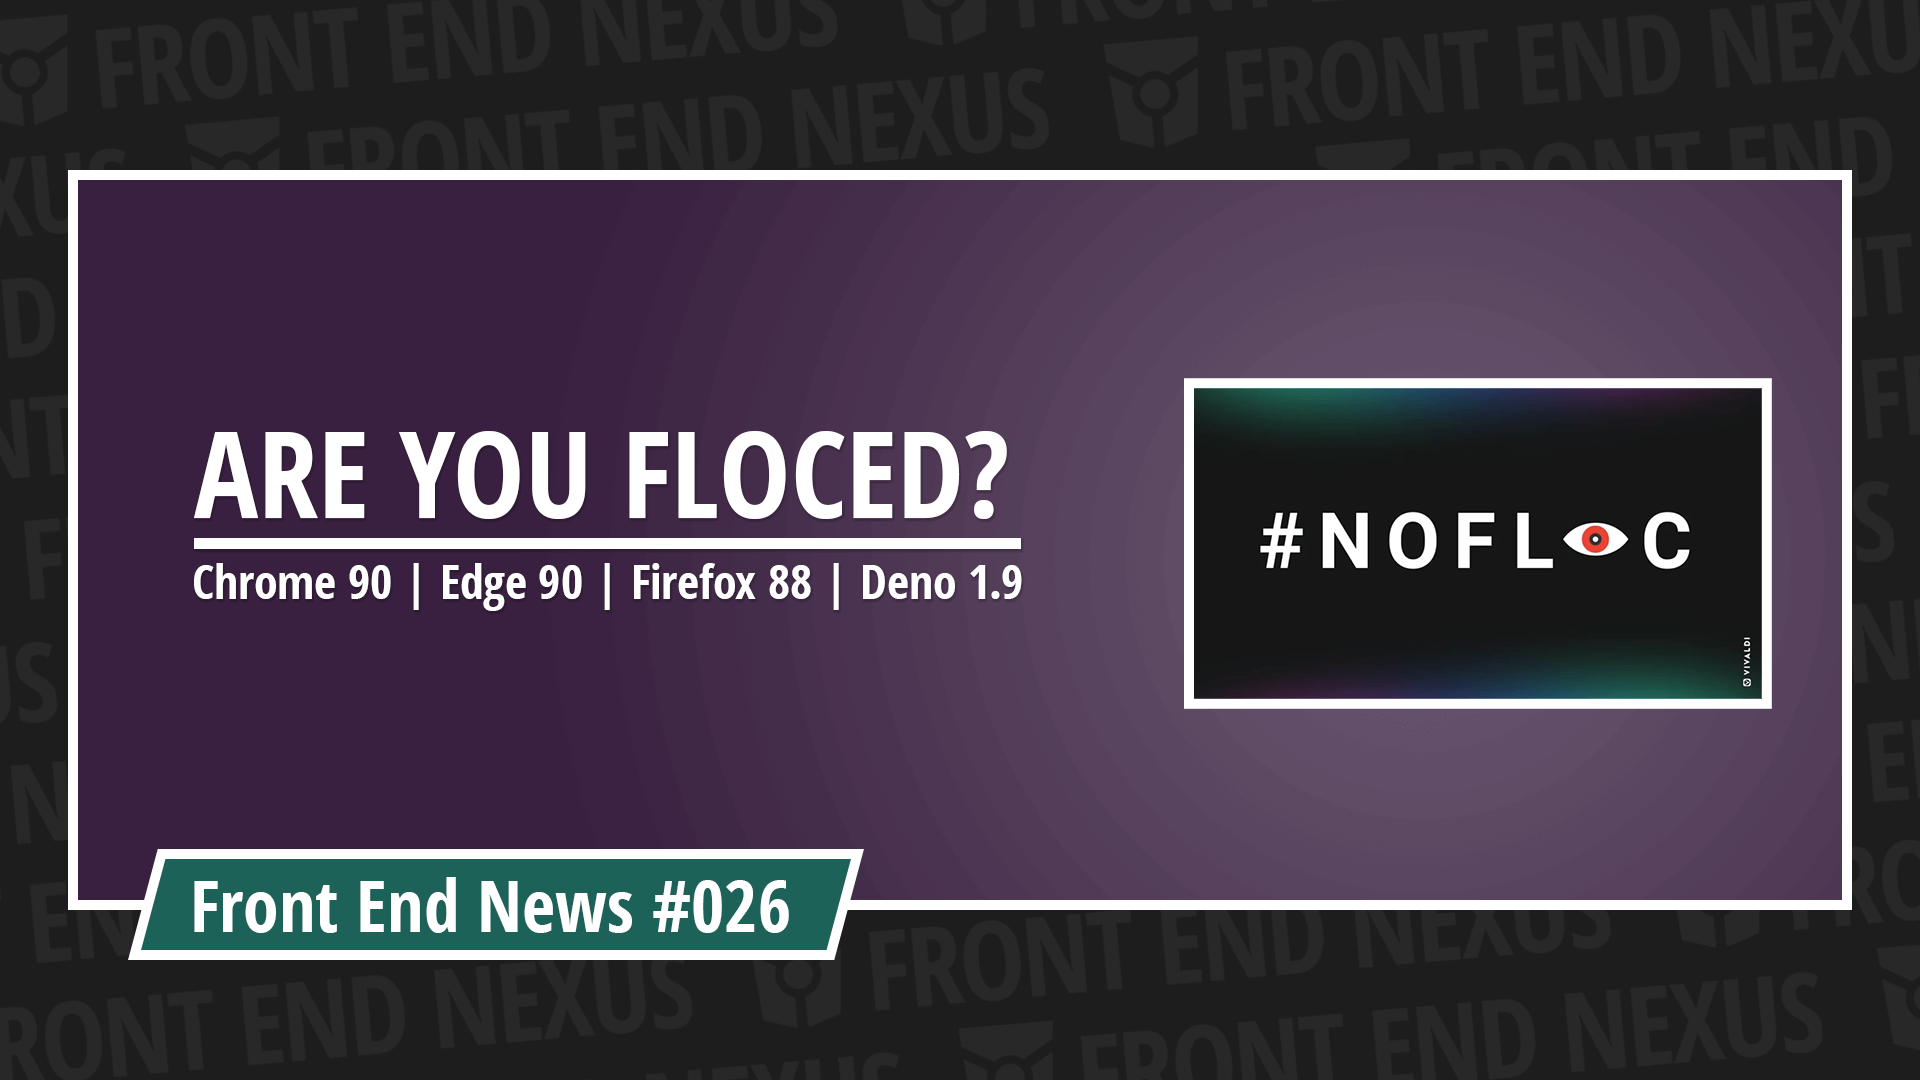 Are You FLoCed? Chrome 90, Edge 90, Firefox 88, and Deno 1.9 | Front End News #026